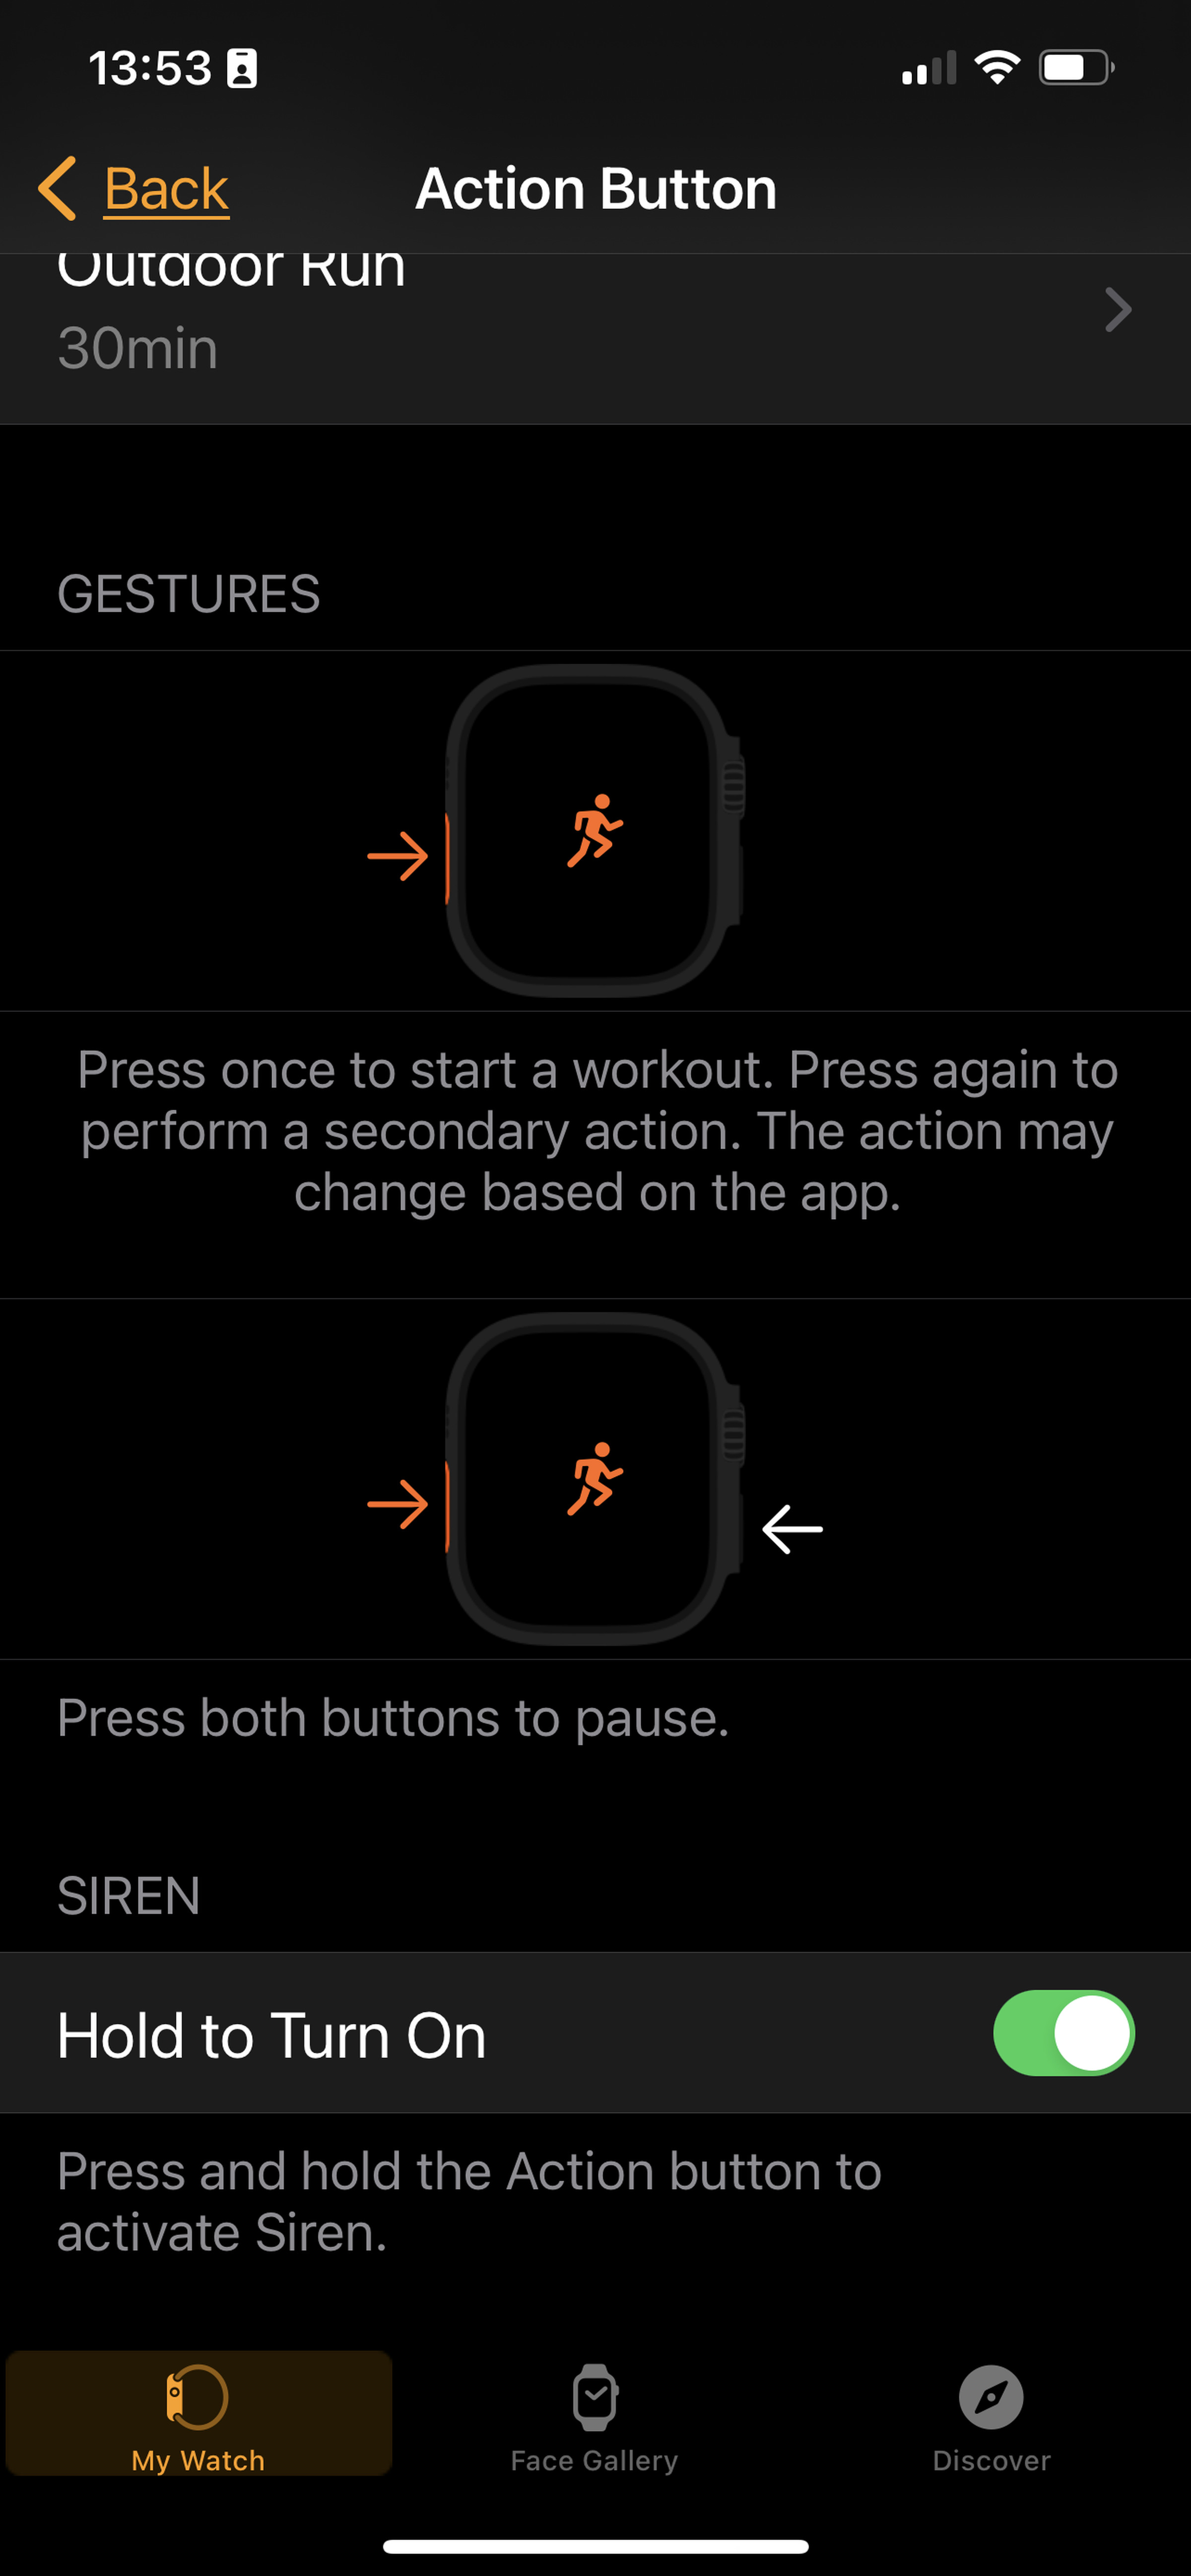 Second half of the Action Button menu showing Gestures and the Siren toggle